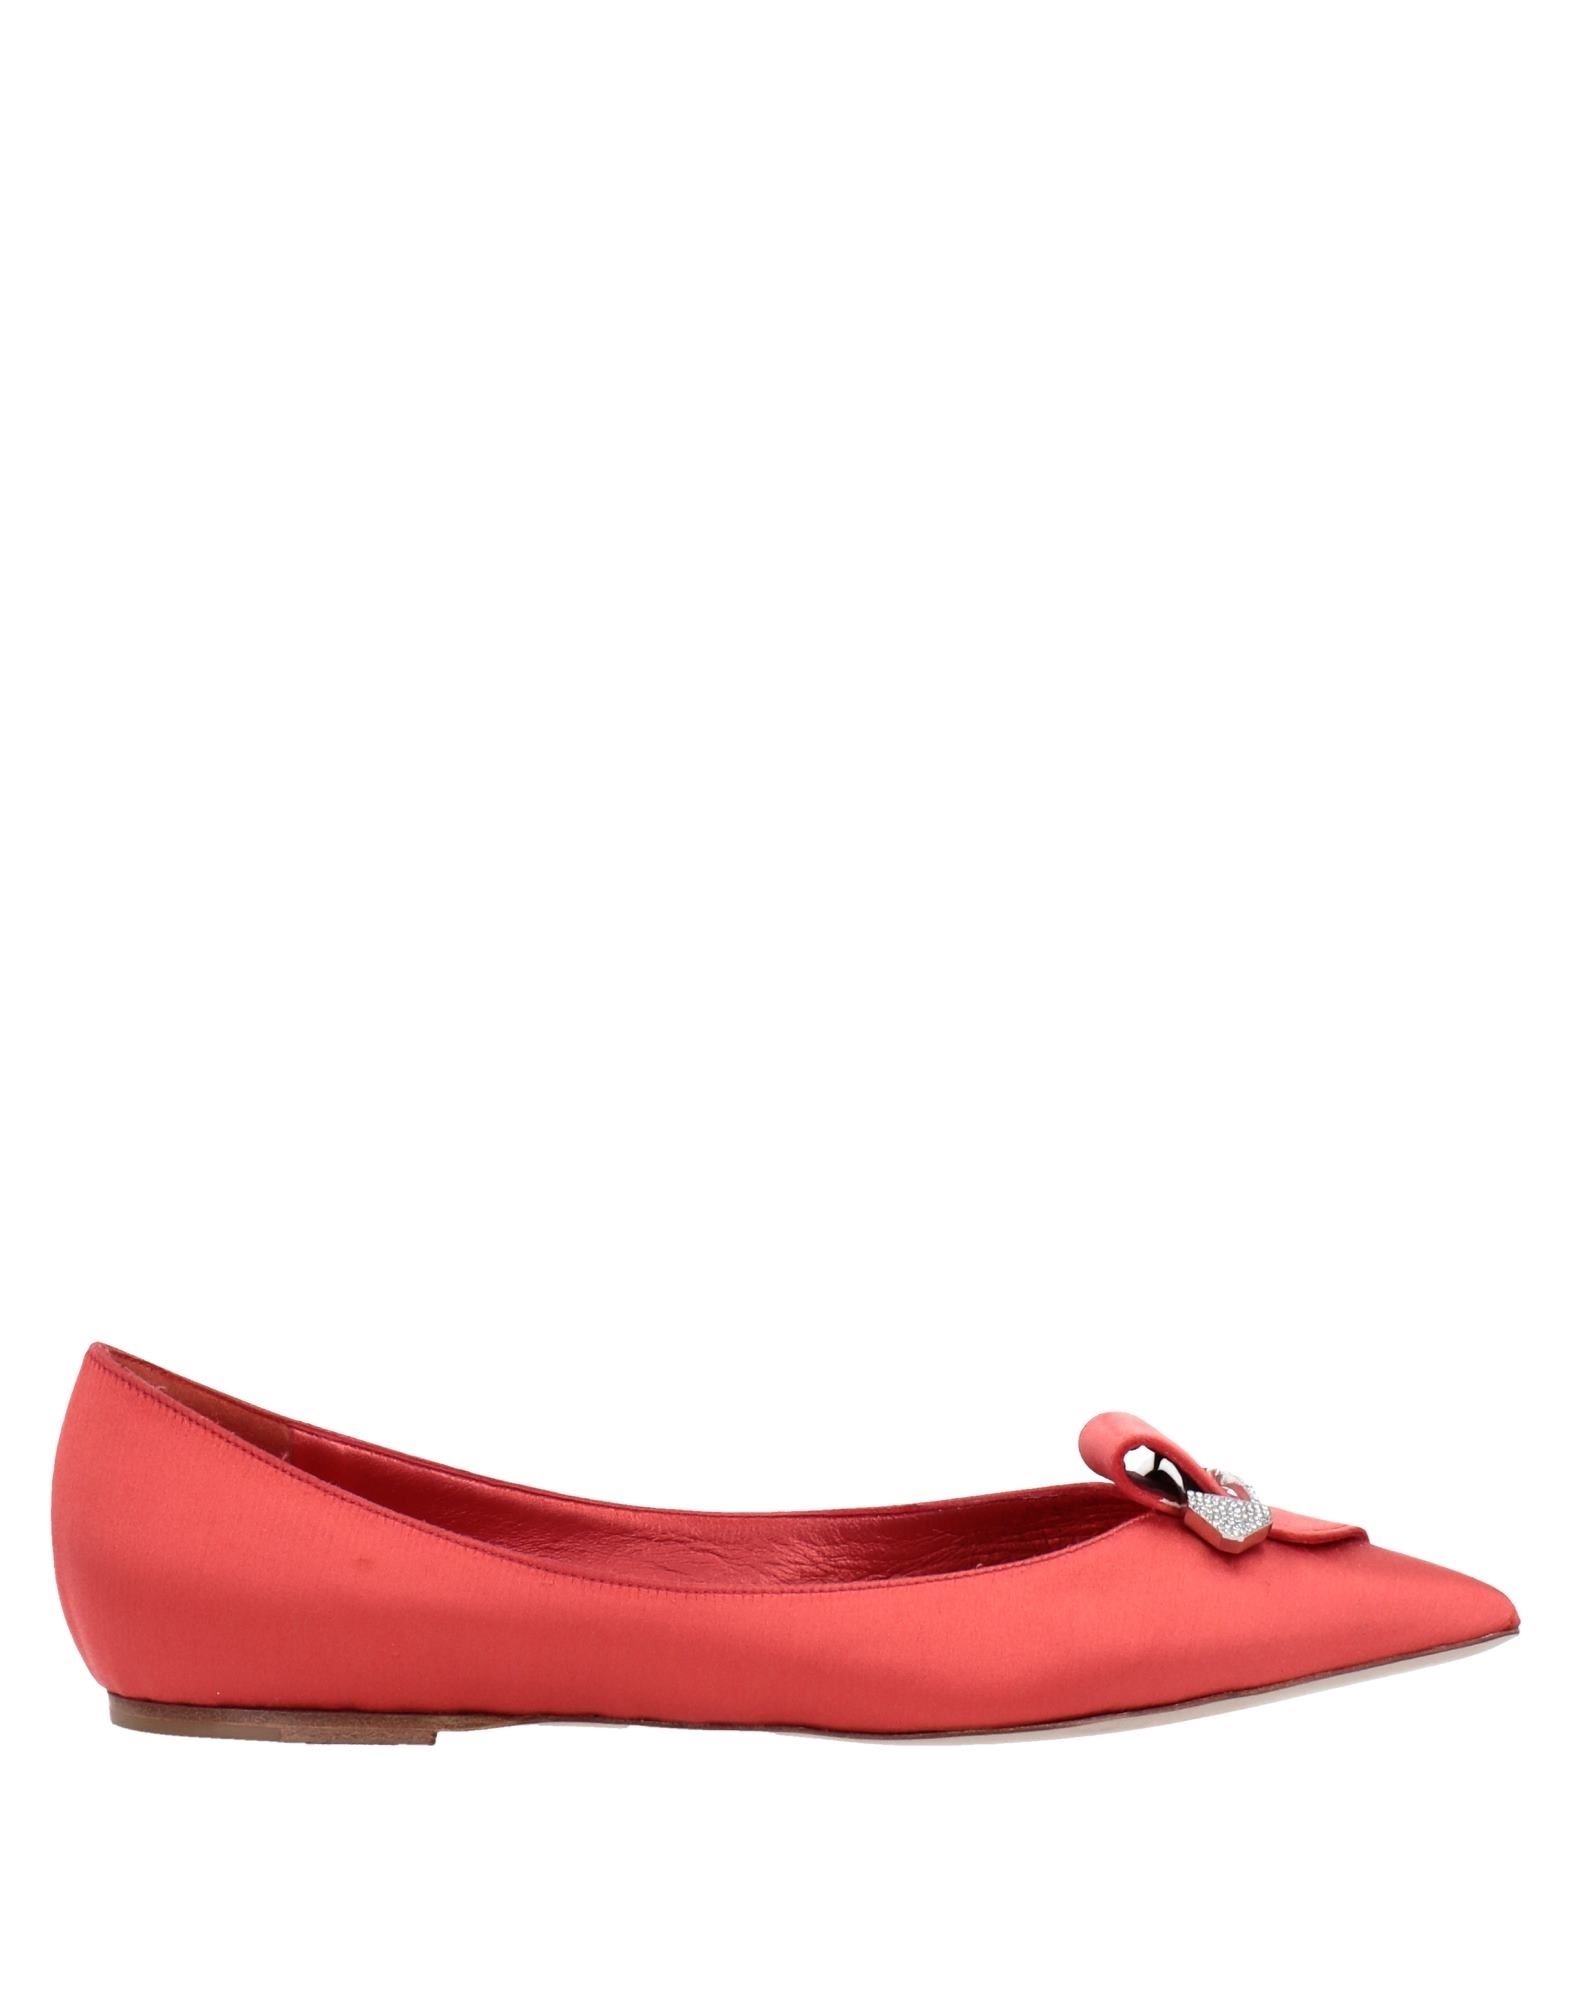 Le Silla Ballet Flats In Coral